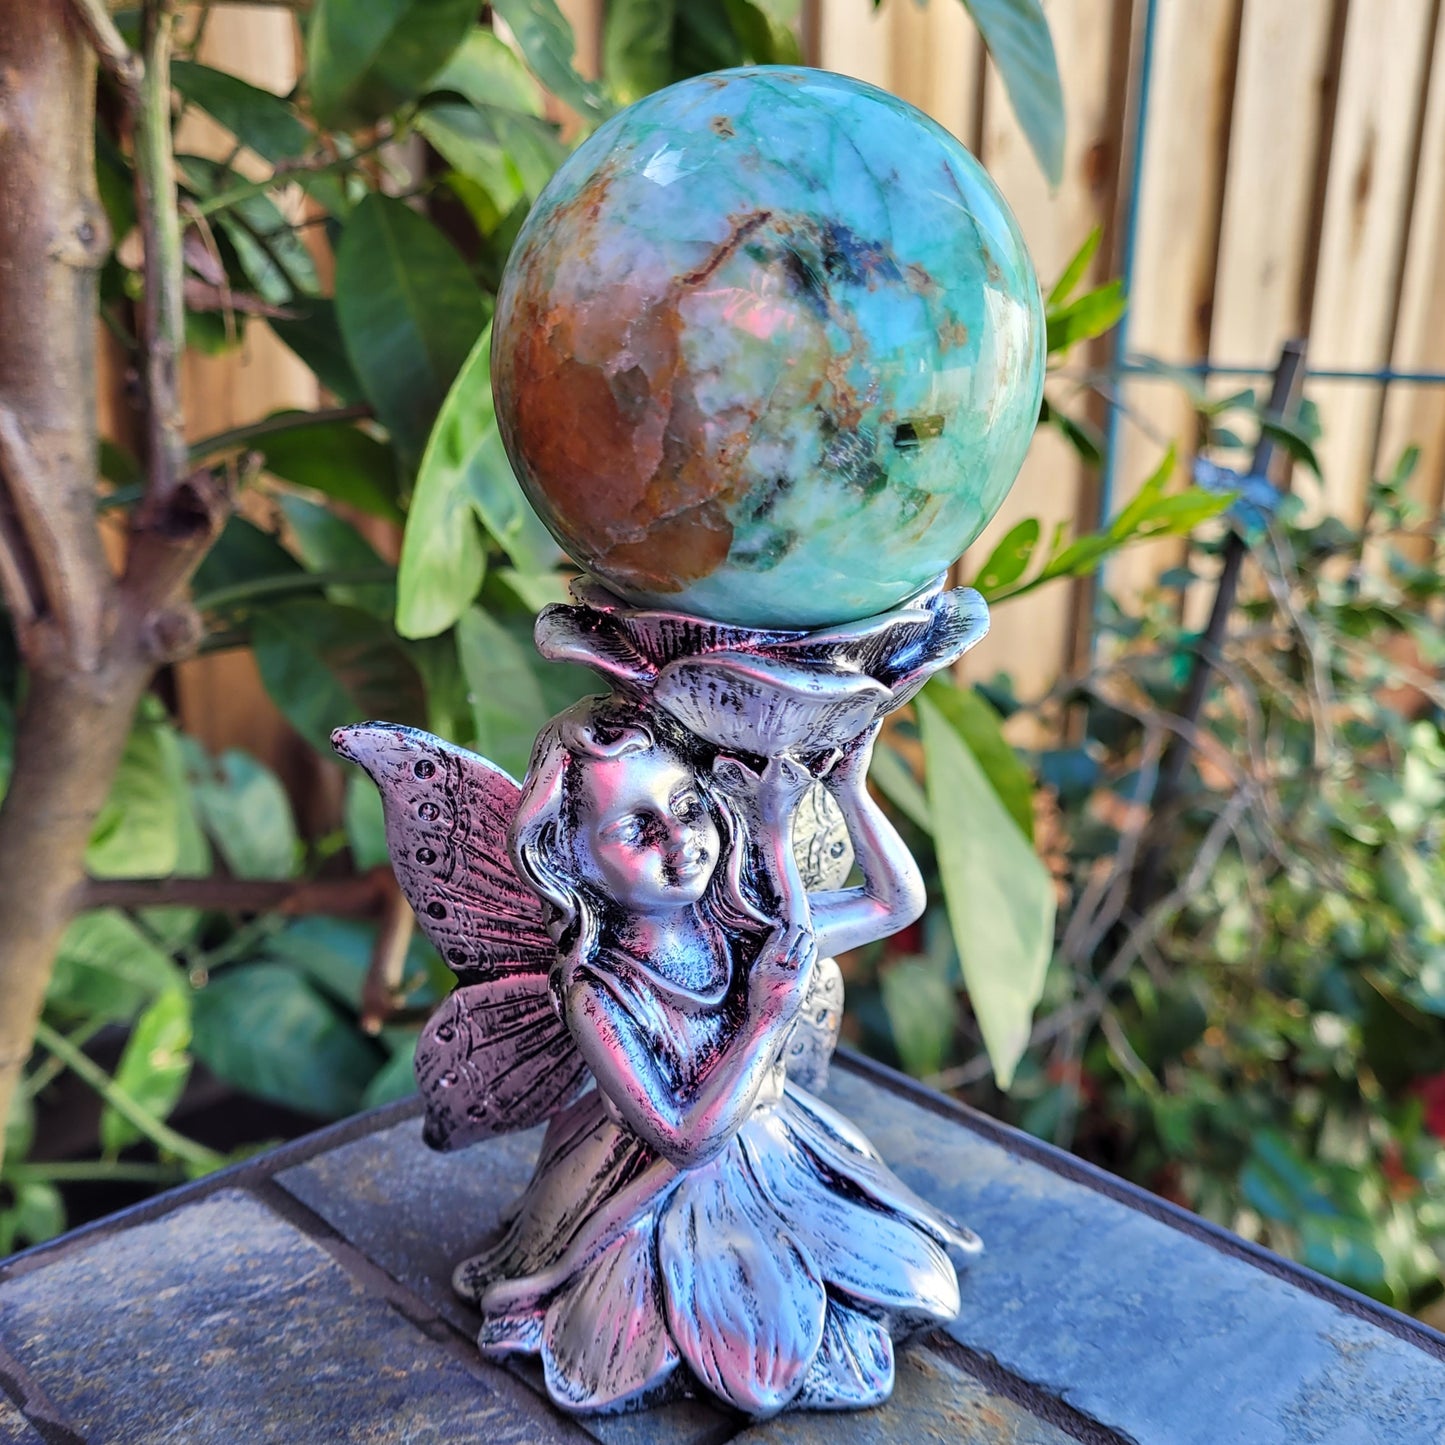 Fairy Sphere Display Stands in 3 Colors, for Crystal Balls or Eggs 1" to 4" (26mm to 102mm)